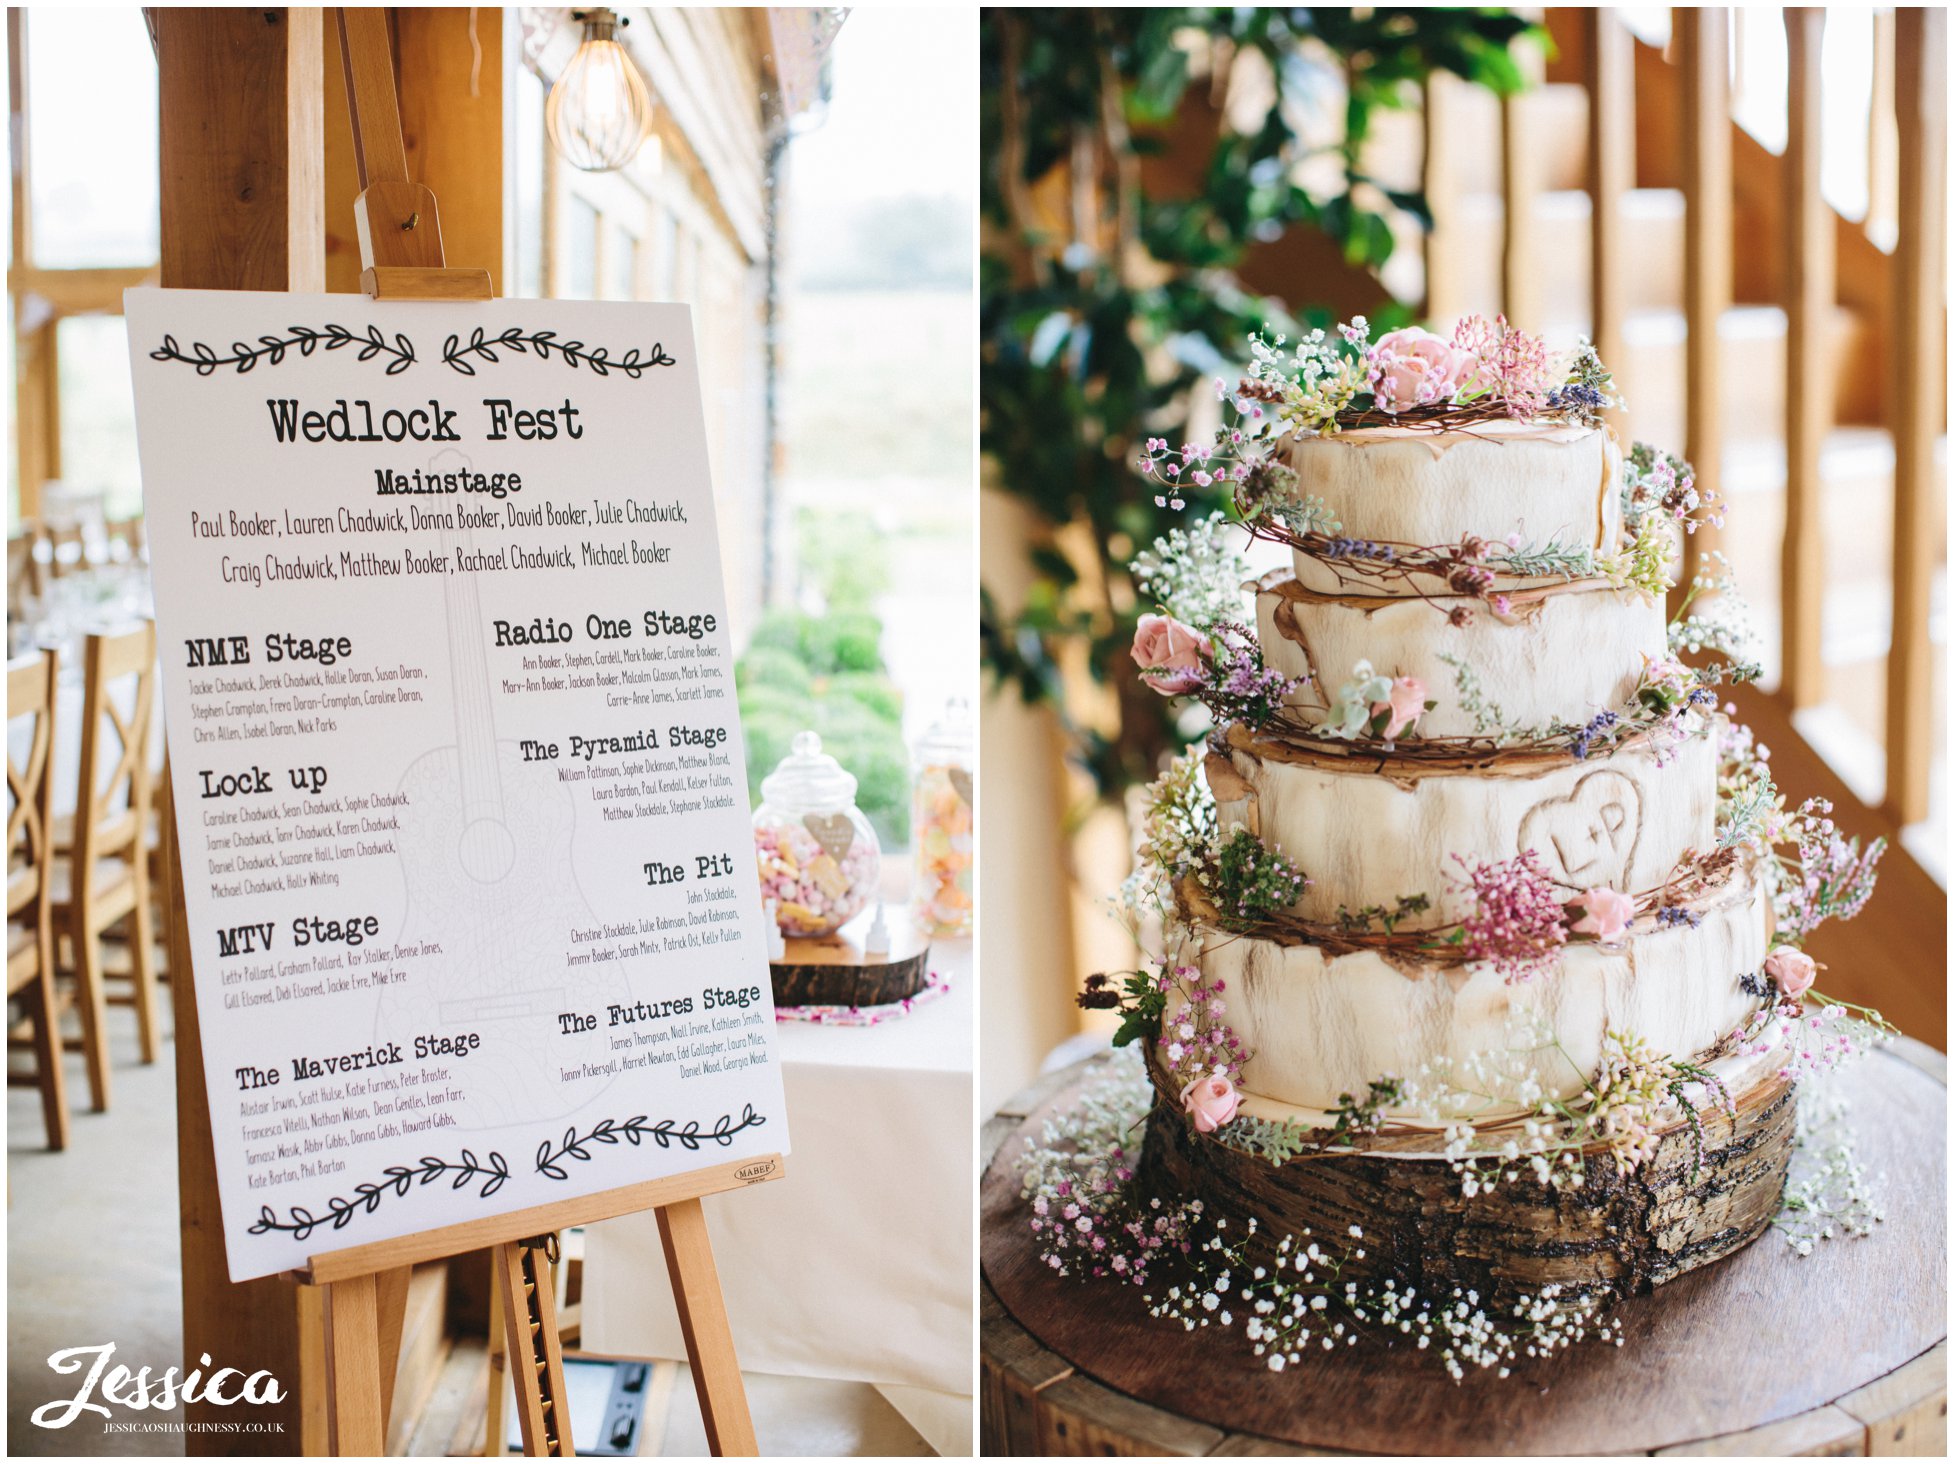 rustic cake and seating plan decorate the barn